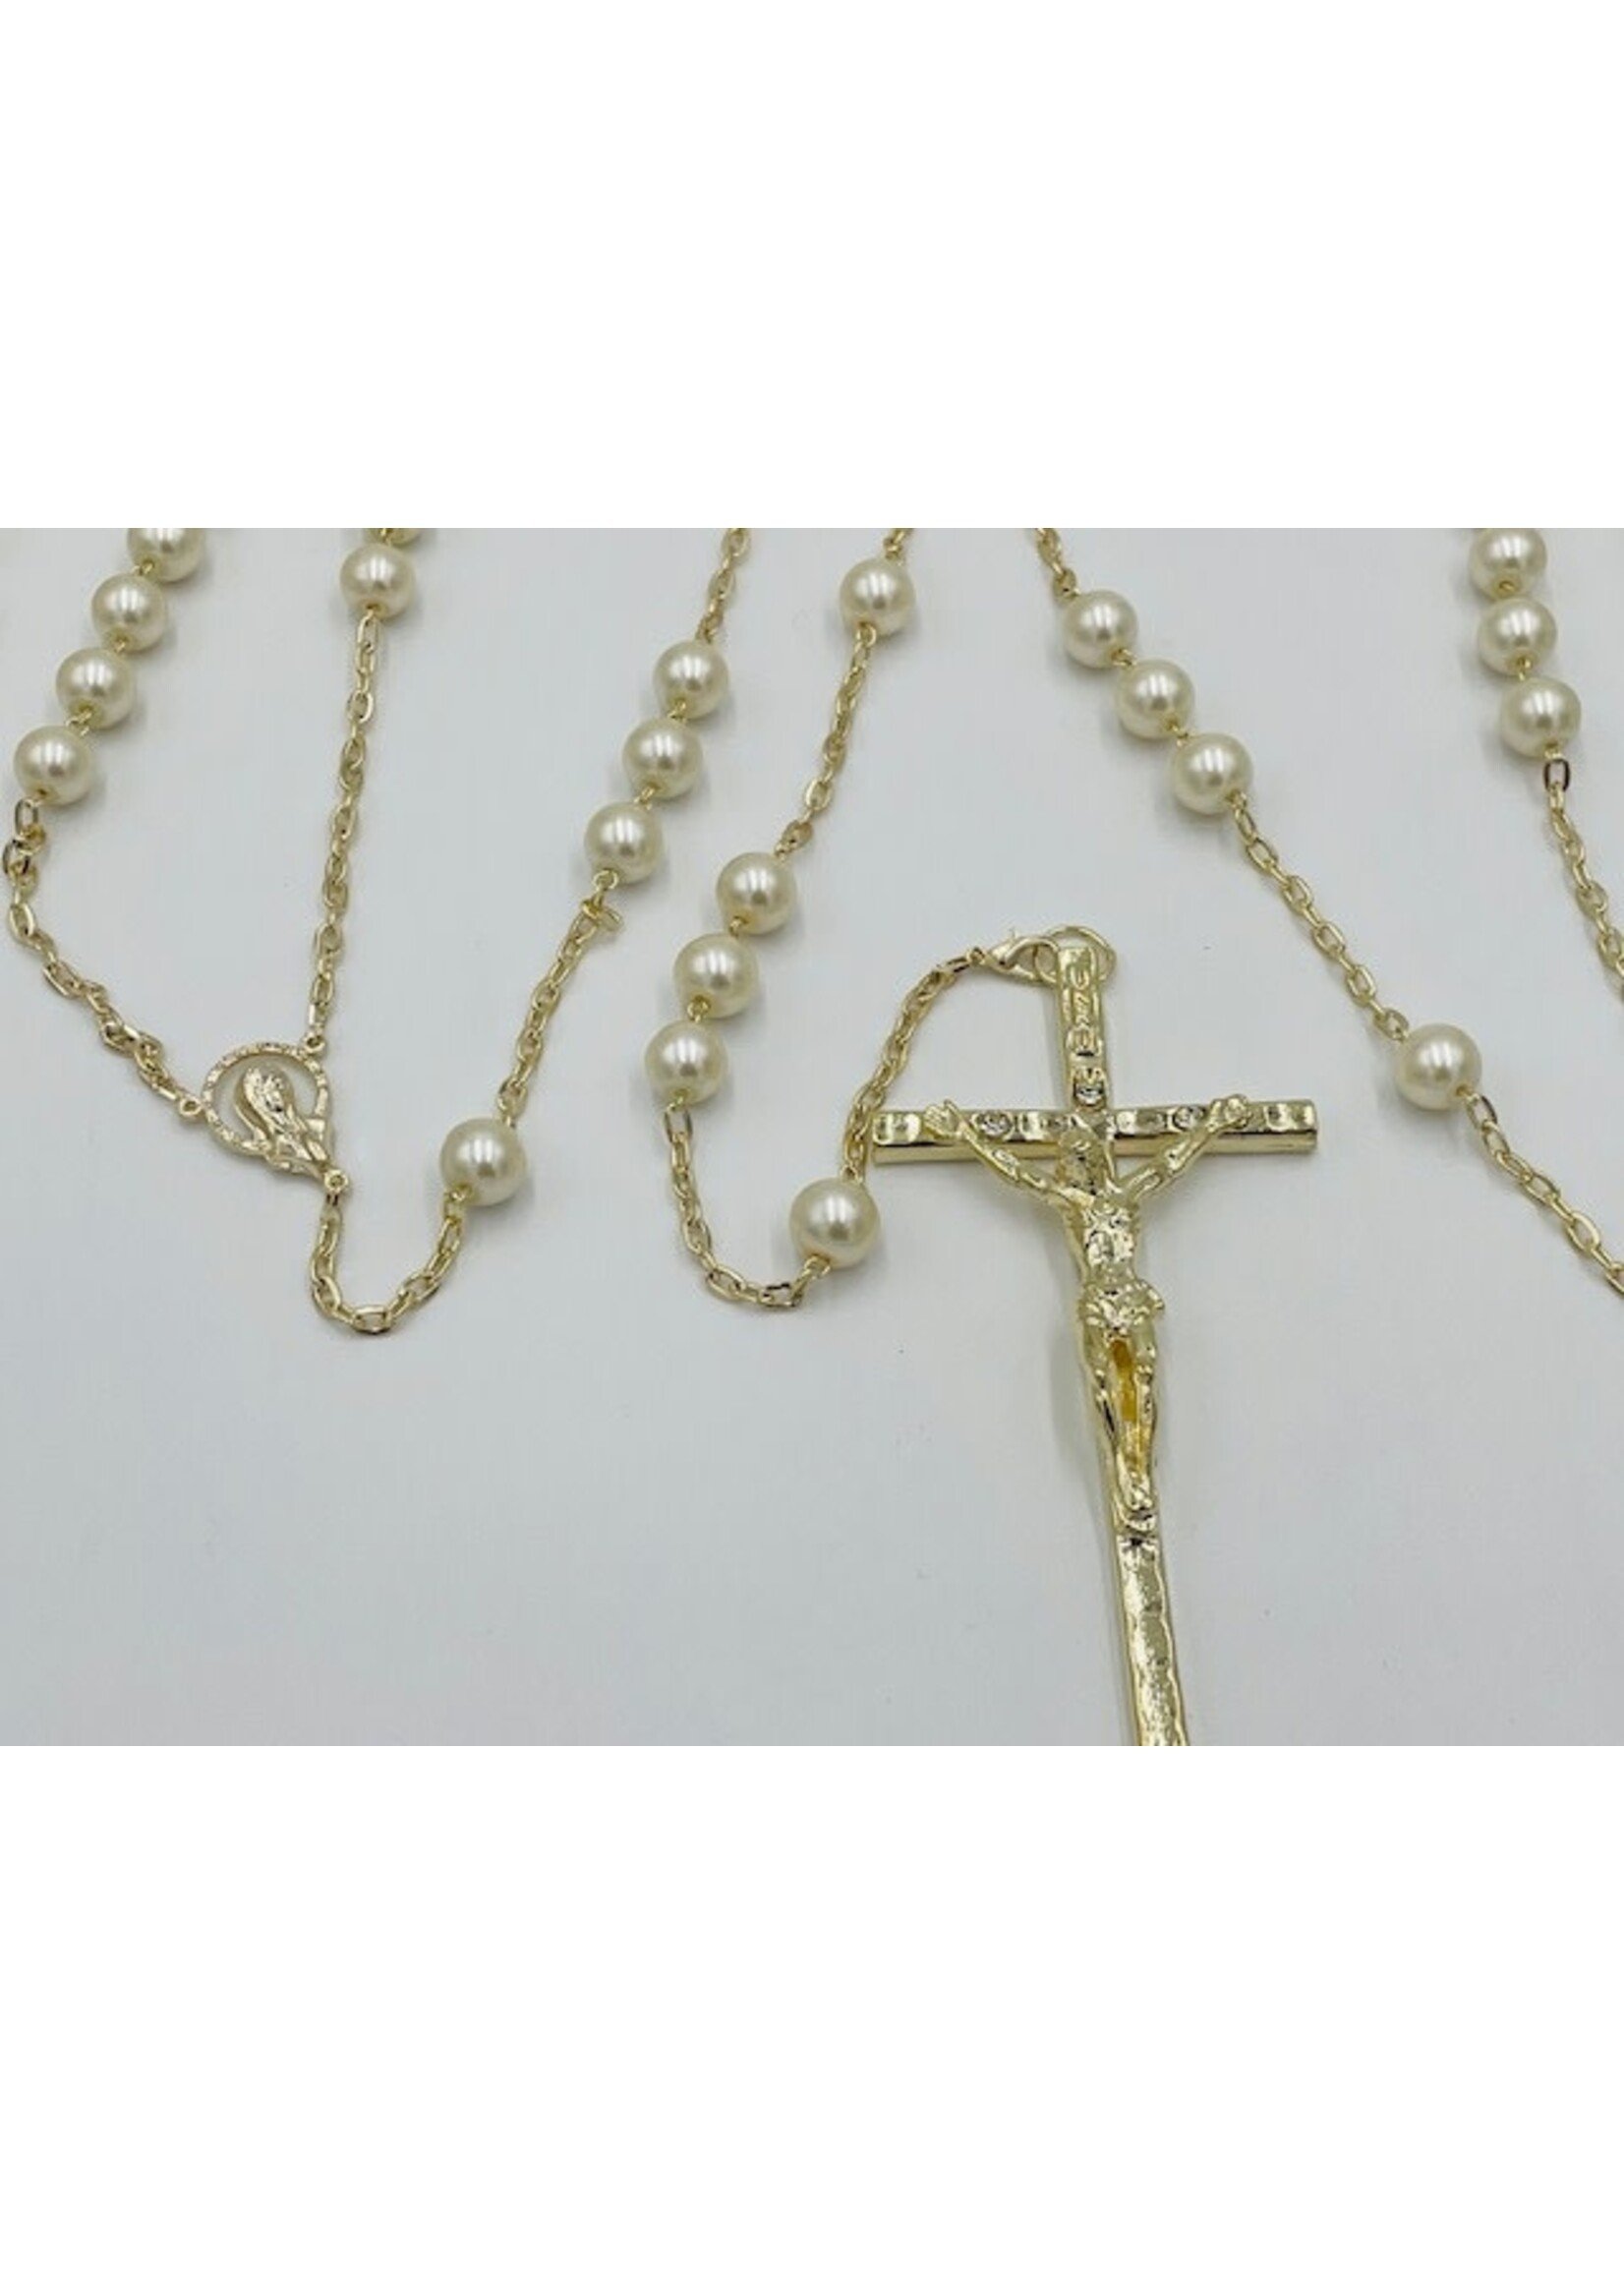 Pearl Rosary Wedding Lasso with gold-tone Crucifix and Deluxe Box